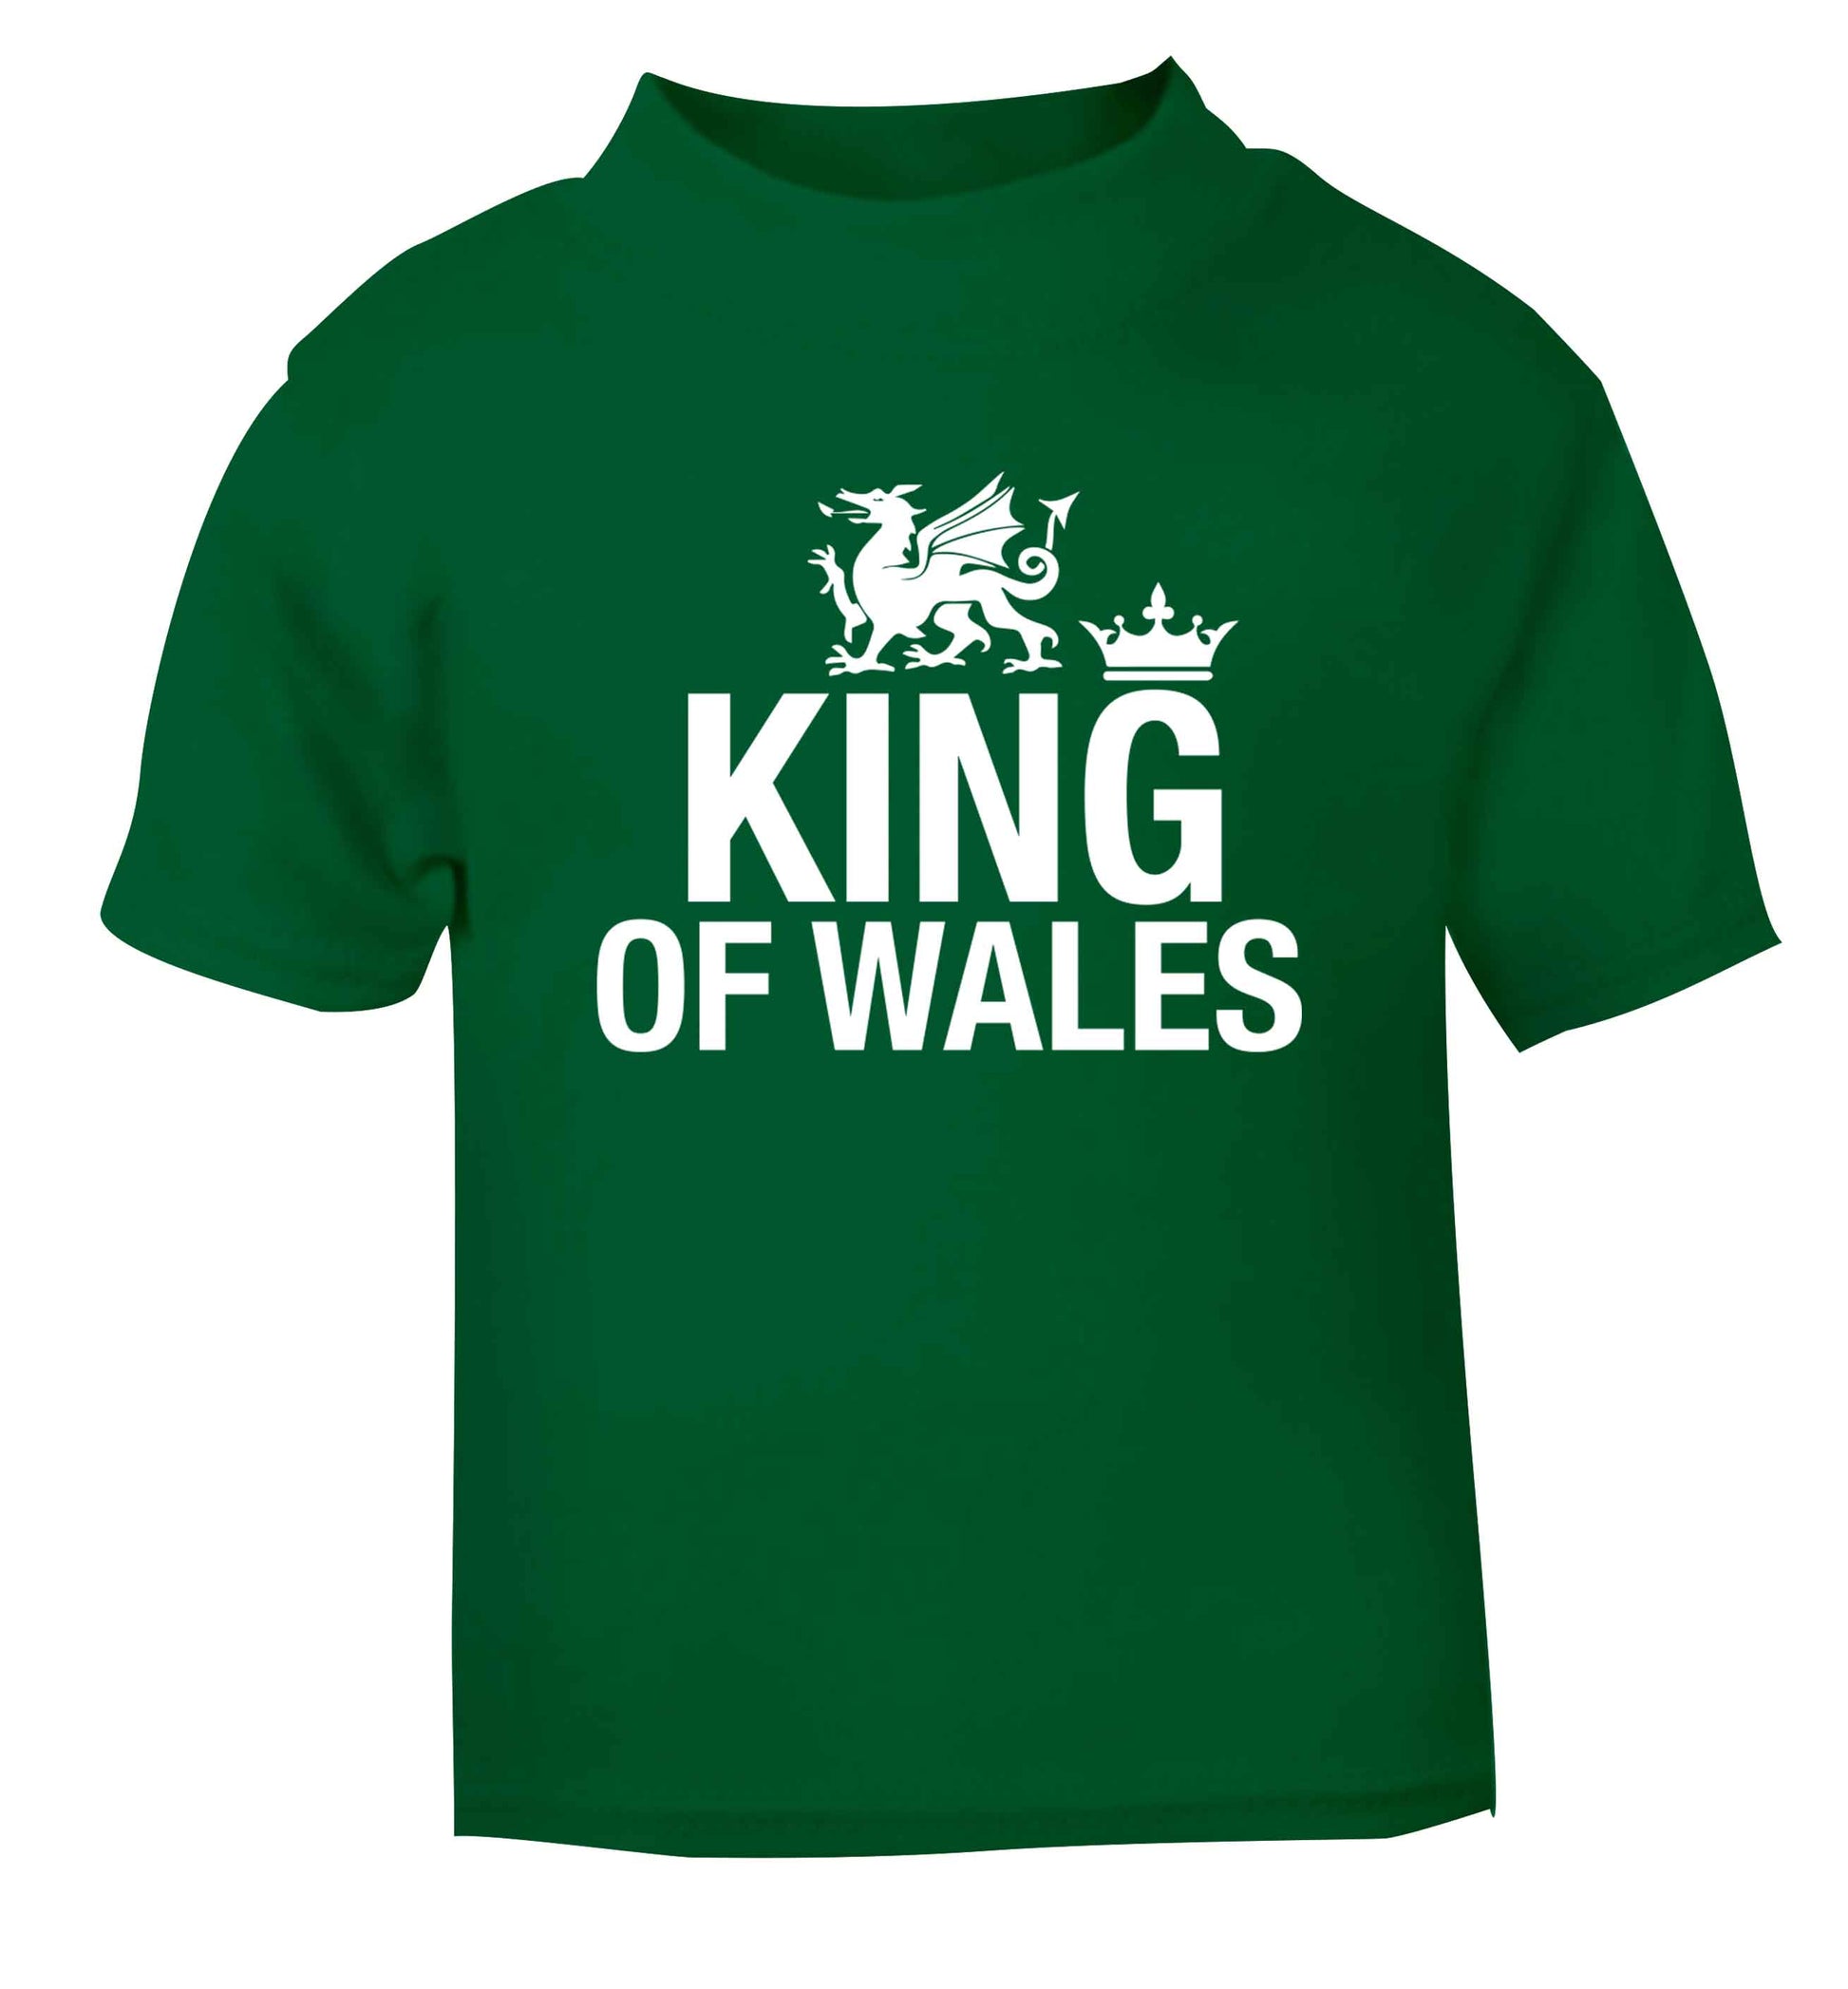 King of Wales green Baby Toddler Tshirt 2 Years